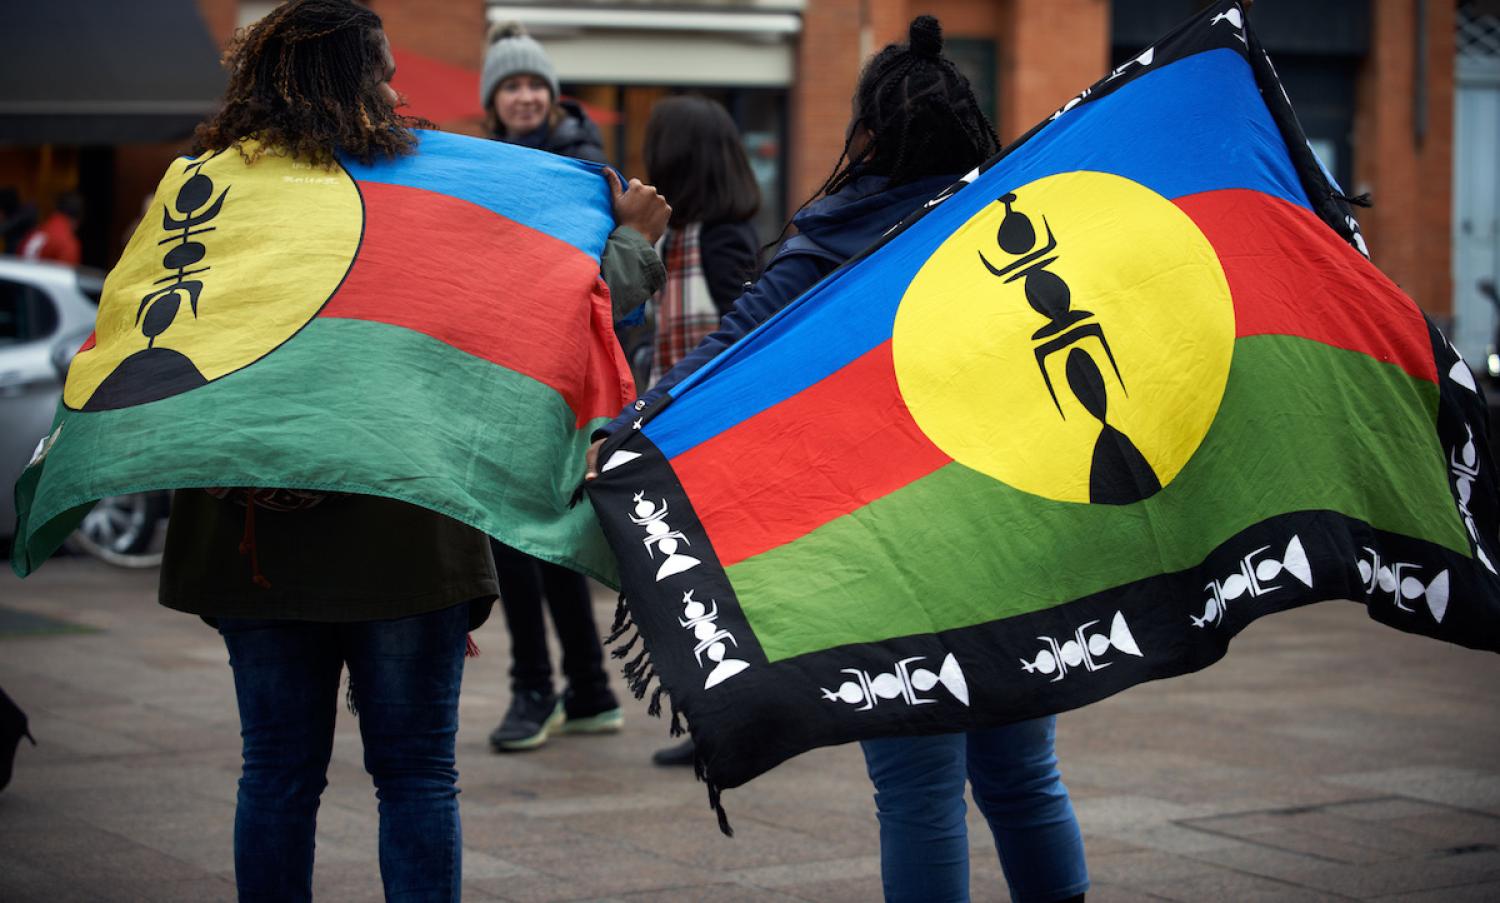 New Caledonians gathered for independence before the referendum on 4 November (Photo: NurPhoto via Getty)